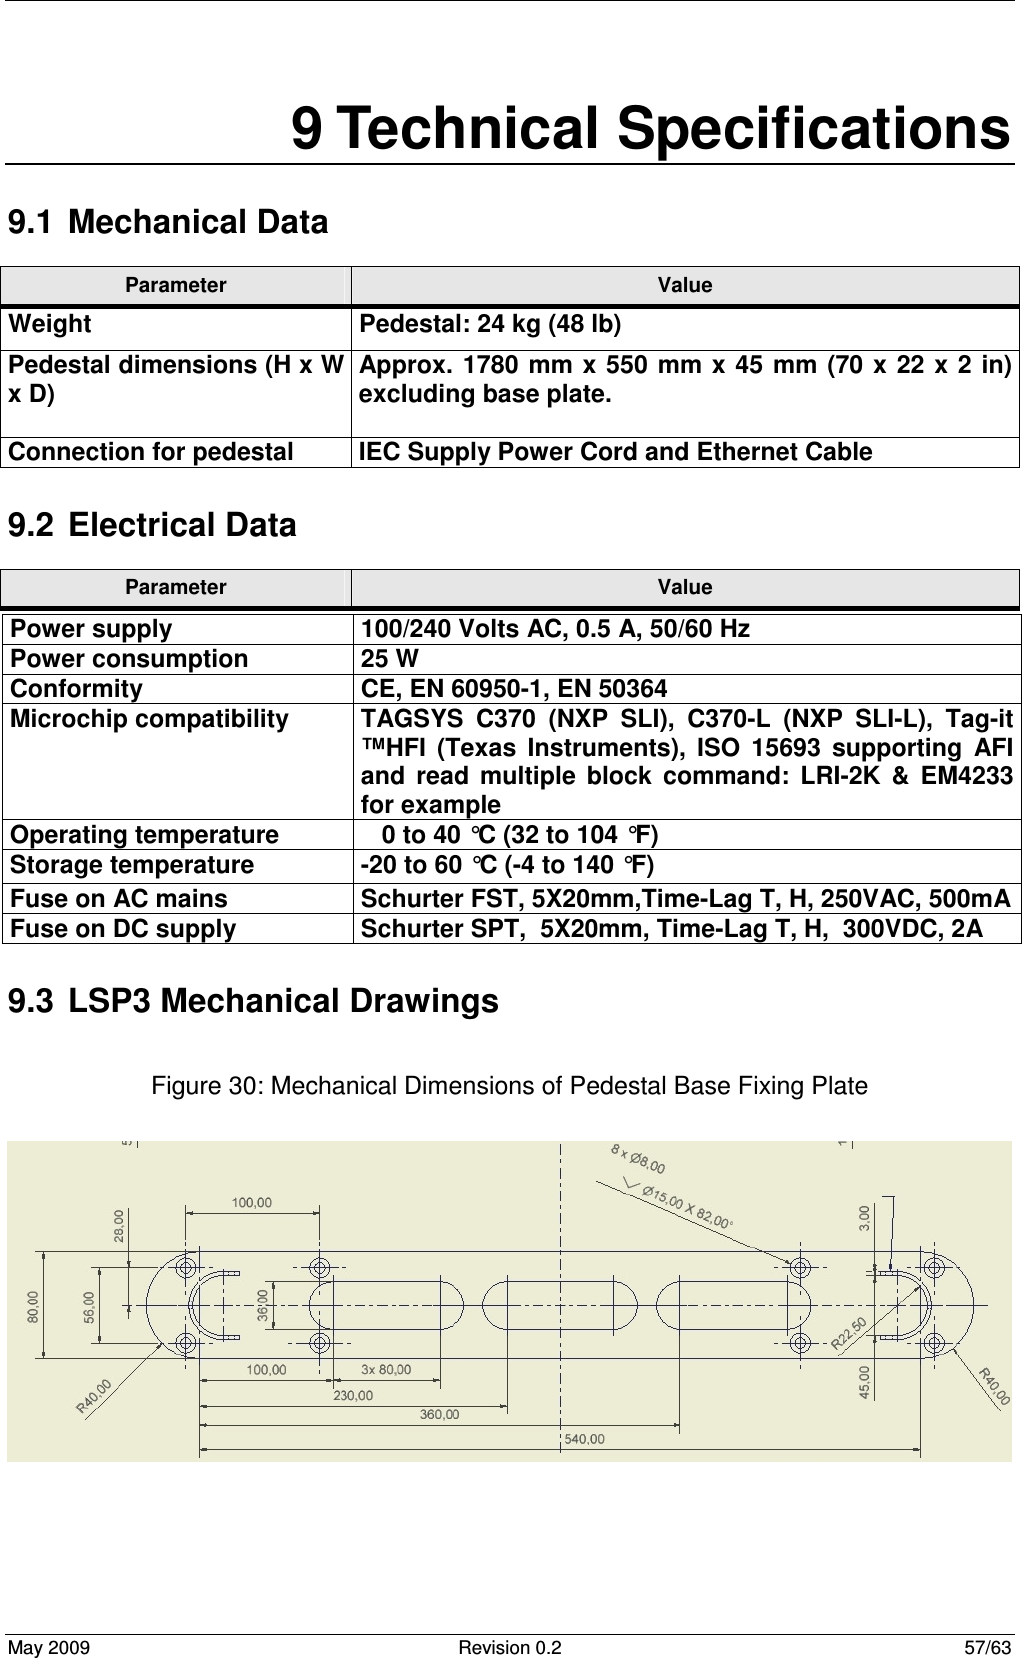  May 2009  Revision 0.2  57/63 9 Technical Specifications 9.1  Mechanical Data Parameter  Value  9.2  Electrical Data Parameter  Value 9.3  LSP3 Mechanical Drawings  Figure 30: Mechanical Dimensions of Pedestal Base Fixing Plate   Weight  Pedestal: 24 kg (48 lb) Pedestal dimensions (H x W x D)  Approx.  1780  mm x  550 mm x 45 mm (70  x 22 x  2 in) excluding base plate.  Connection for pedestal  IEC Supply Power Cord and Ethernet Cable Power supply   100/240 Volts AC, 0.5 A, 50/60 Hz Power consumption  25 W Conformity  CE, EN 60950-1, EN 50364 Microchip compatibility  TAGSYS  C370  (NXP  SLI),  C370-L  (NXP  SLI-L),  Tag-it ™HFI  (Texas  Instruments),  ISO  15693  supporting  AFI and  read  multiple  block  command:  LRI-2K  &amp;  EM4233 for example Operating temperature     0 to 40 °C (32 to 104 °F) Storage temperature  -20 to 60 °C (-4 to 140 °F) Fuse on AC mains  Schurter FST, 5X20mm,Time-Lag T, H, 250VAC, 500mA Fuse on DC supply   Schurter SPT,  5X20mm, Time-Lag T, H,  300VDC, 2A 